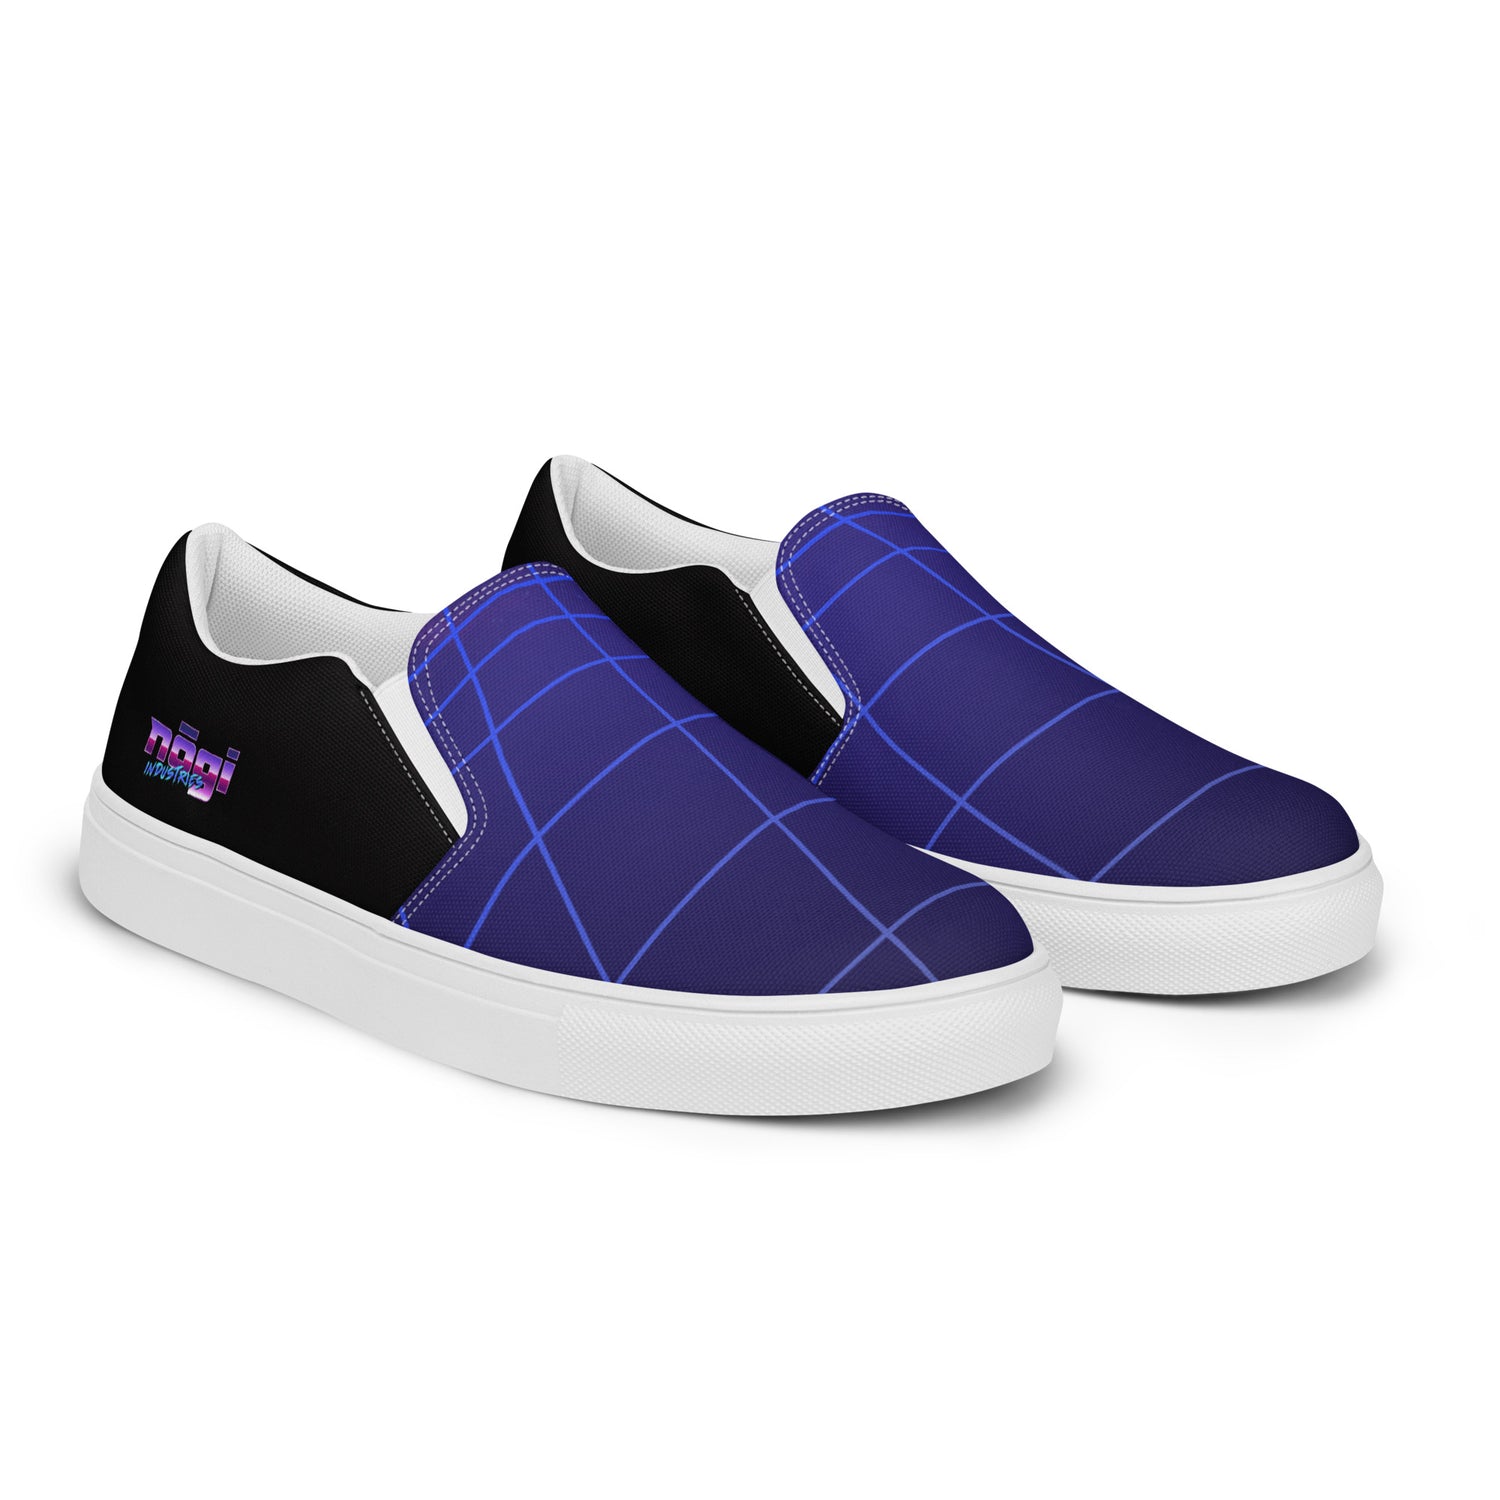 Crystal Vision Men’s Slip-On Canvas Shoes by Nogi Industries